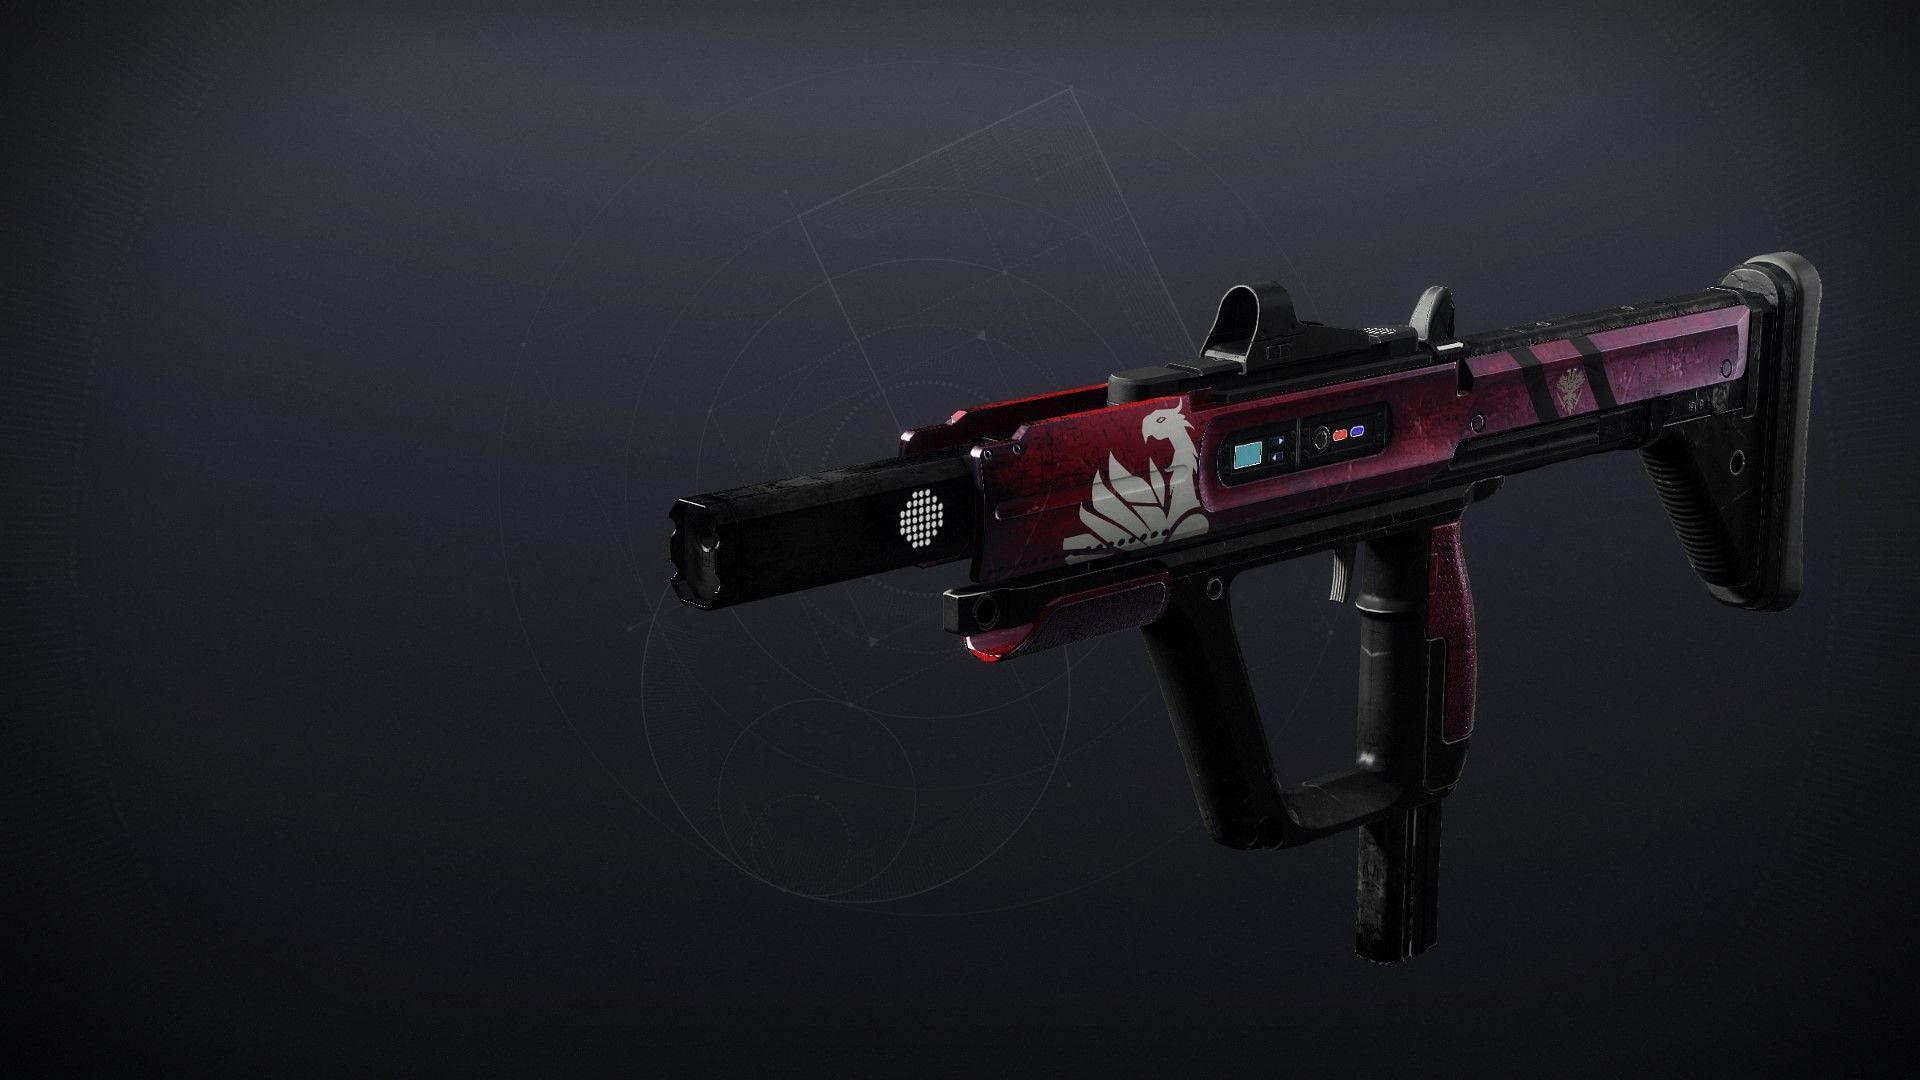 Unendiing Tempest Precision Submachine Gun from Destiny 2 Season of the Witch 